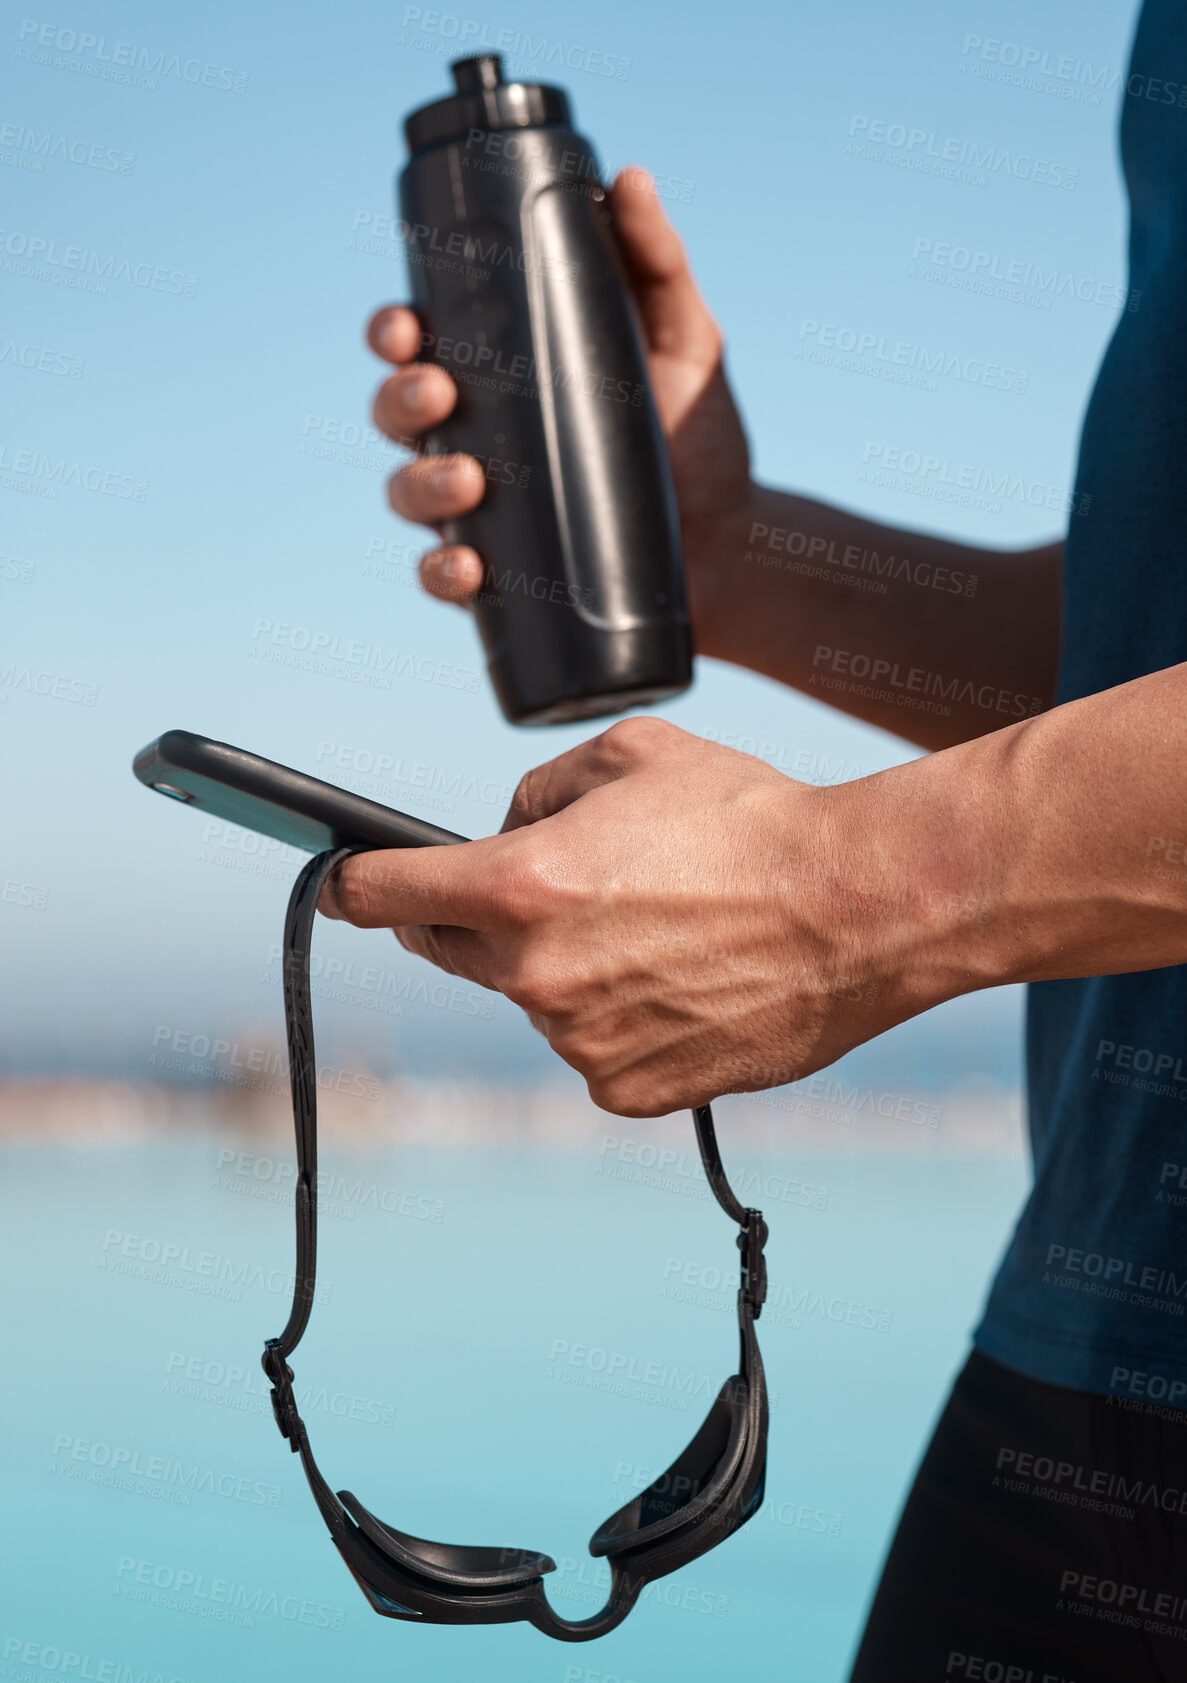 Buy stock photo Shot of an unrecognisable man using a smartphone before going for a swim